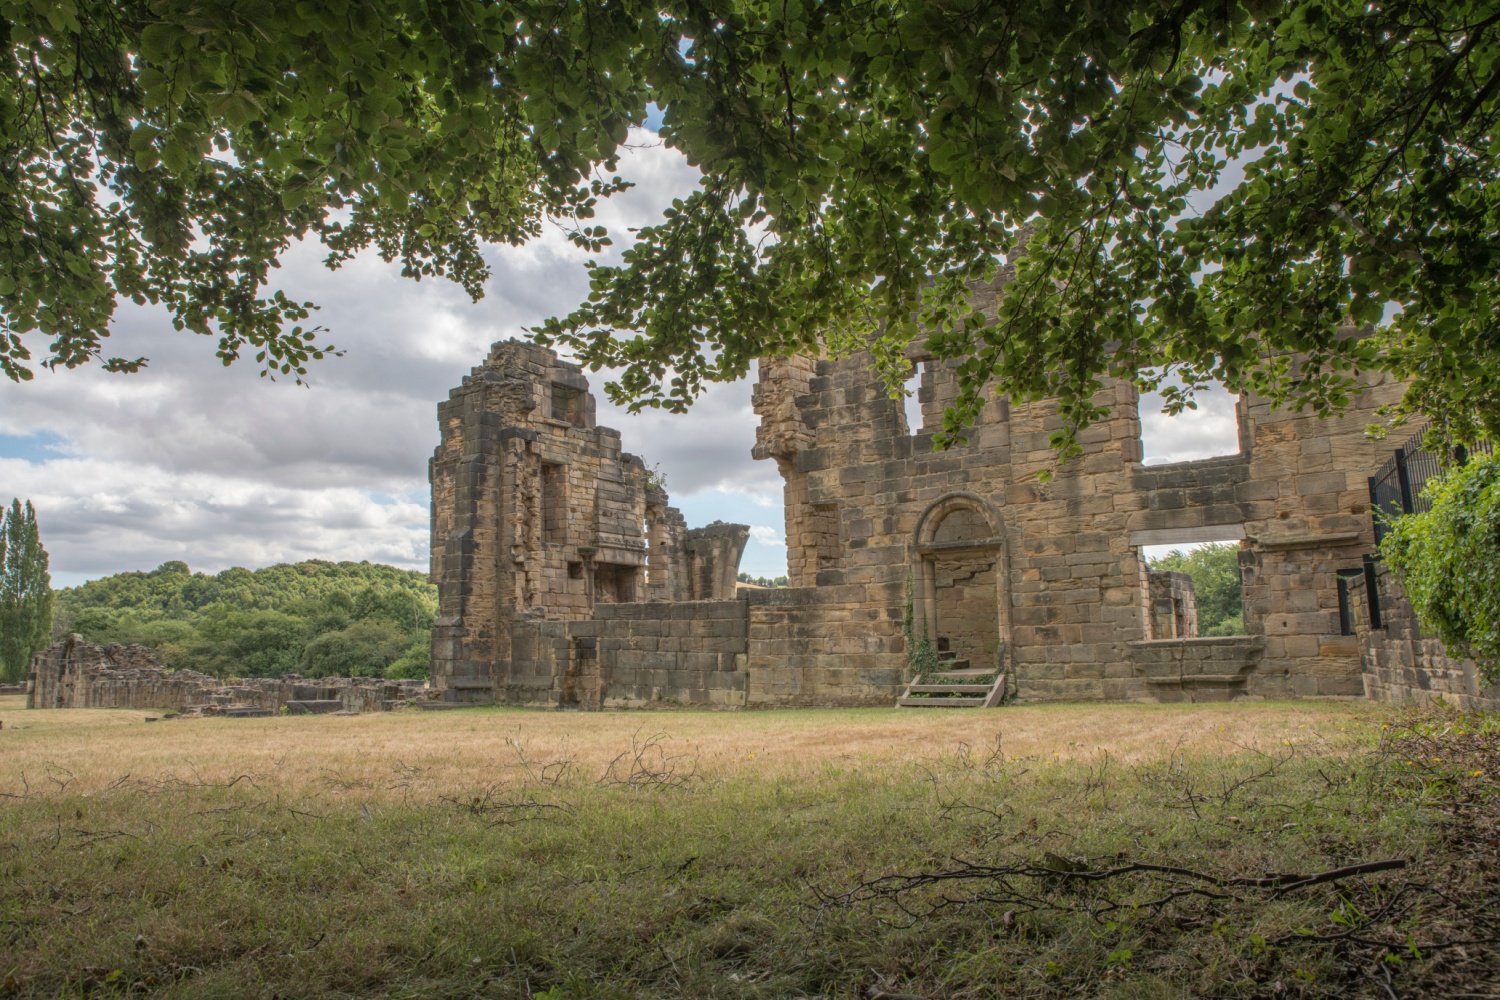 Image name monk bretton priory barnsley south yorkshire the 5 image from the post A look at the history of Monk Bretton Priory, Barnsley, with Dr Emma Wells in Yorkshire.com.